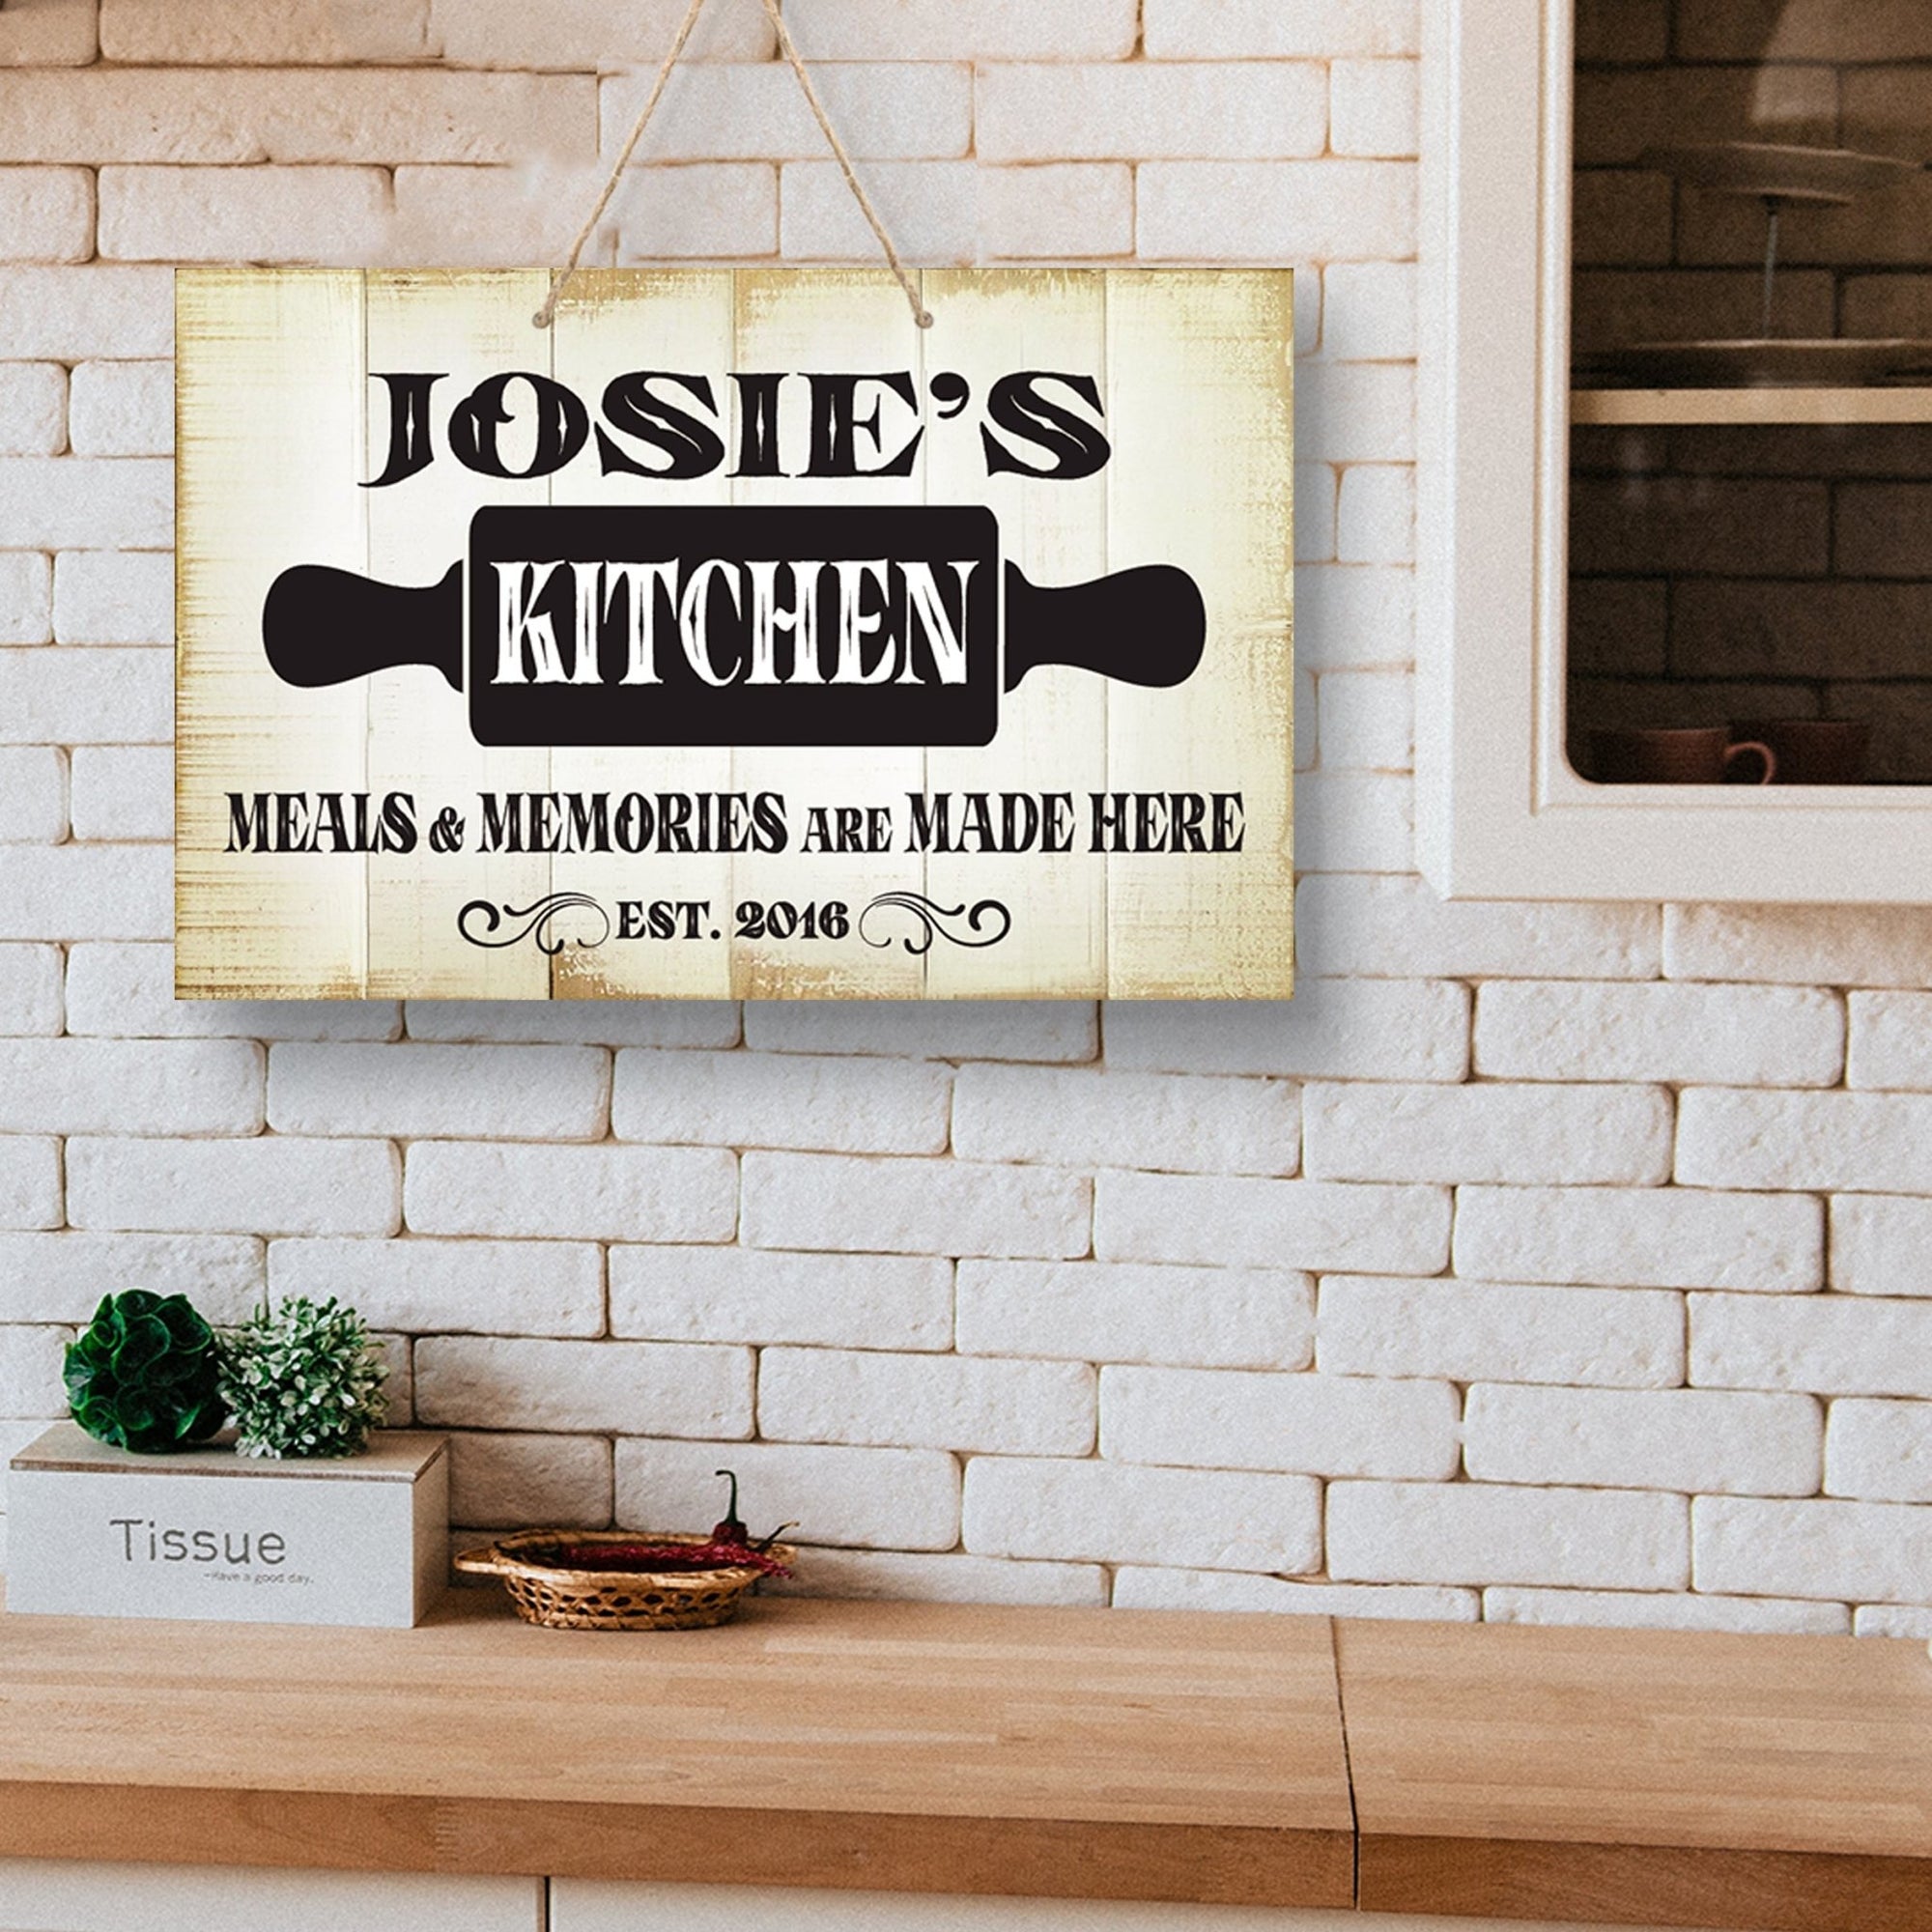 Inspirational Rustic Wooden Wall Hanging Rope Sign Kitchen Décor - Meals And Memories